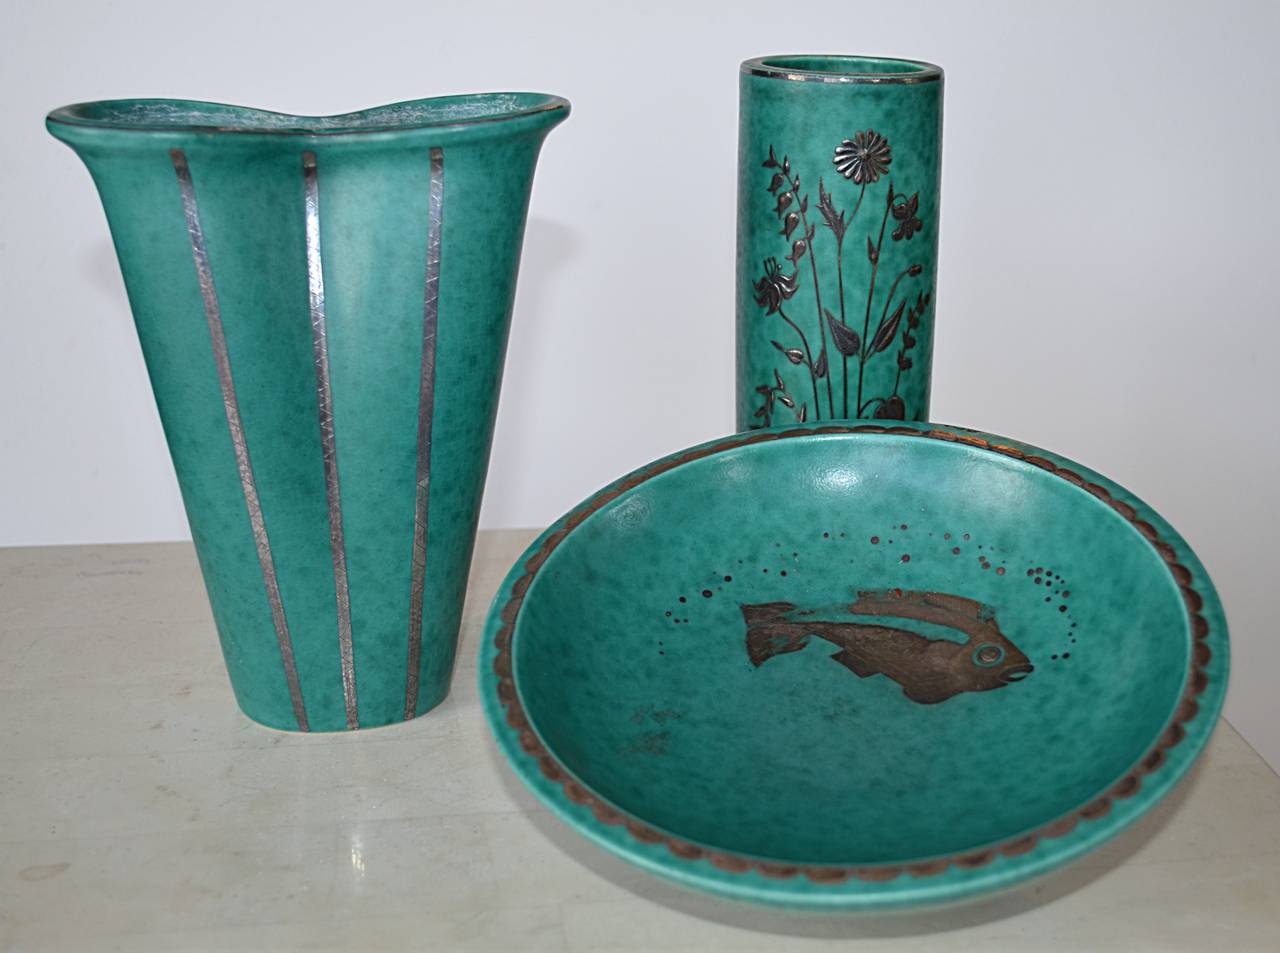 Three pieces of Gustavsberg ceramics by Wilhelm Kage with silver inlays. Fish bowl is 7